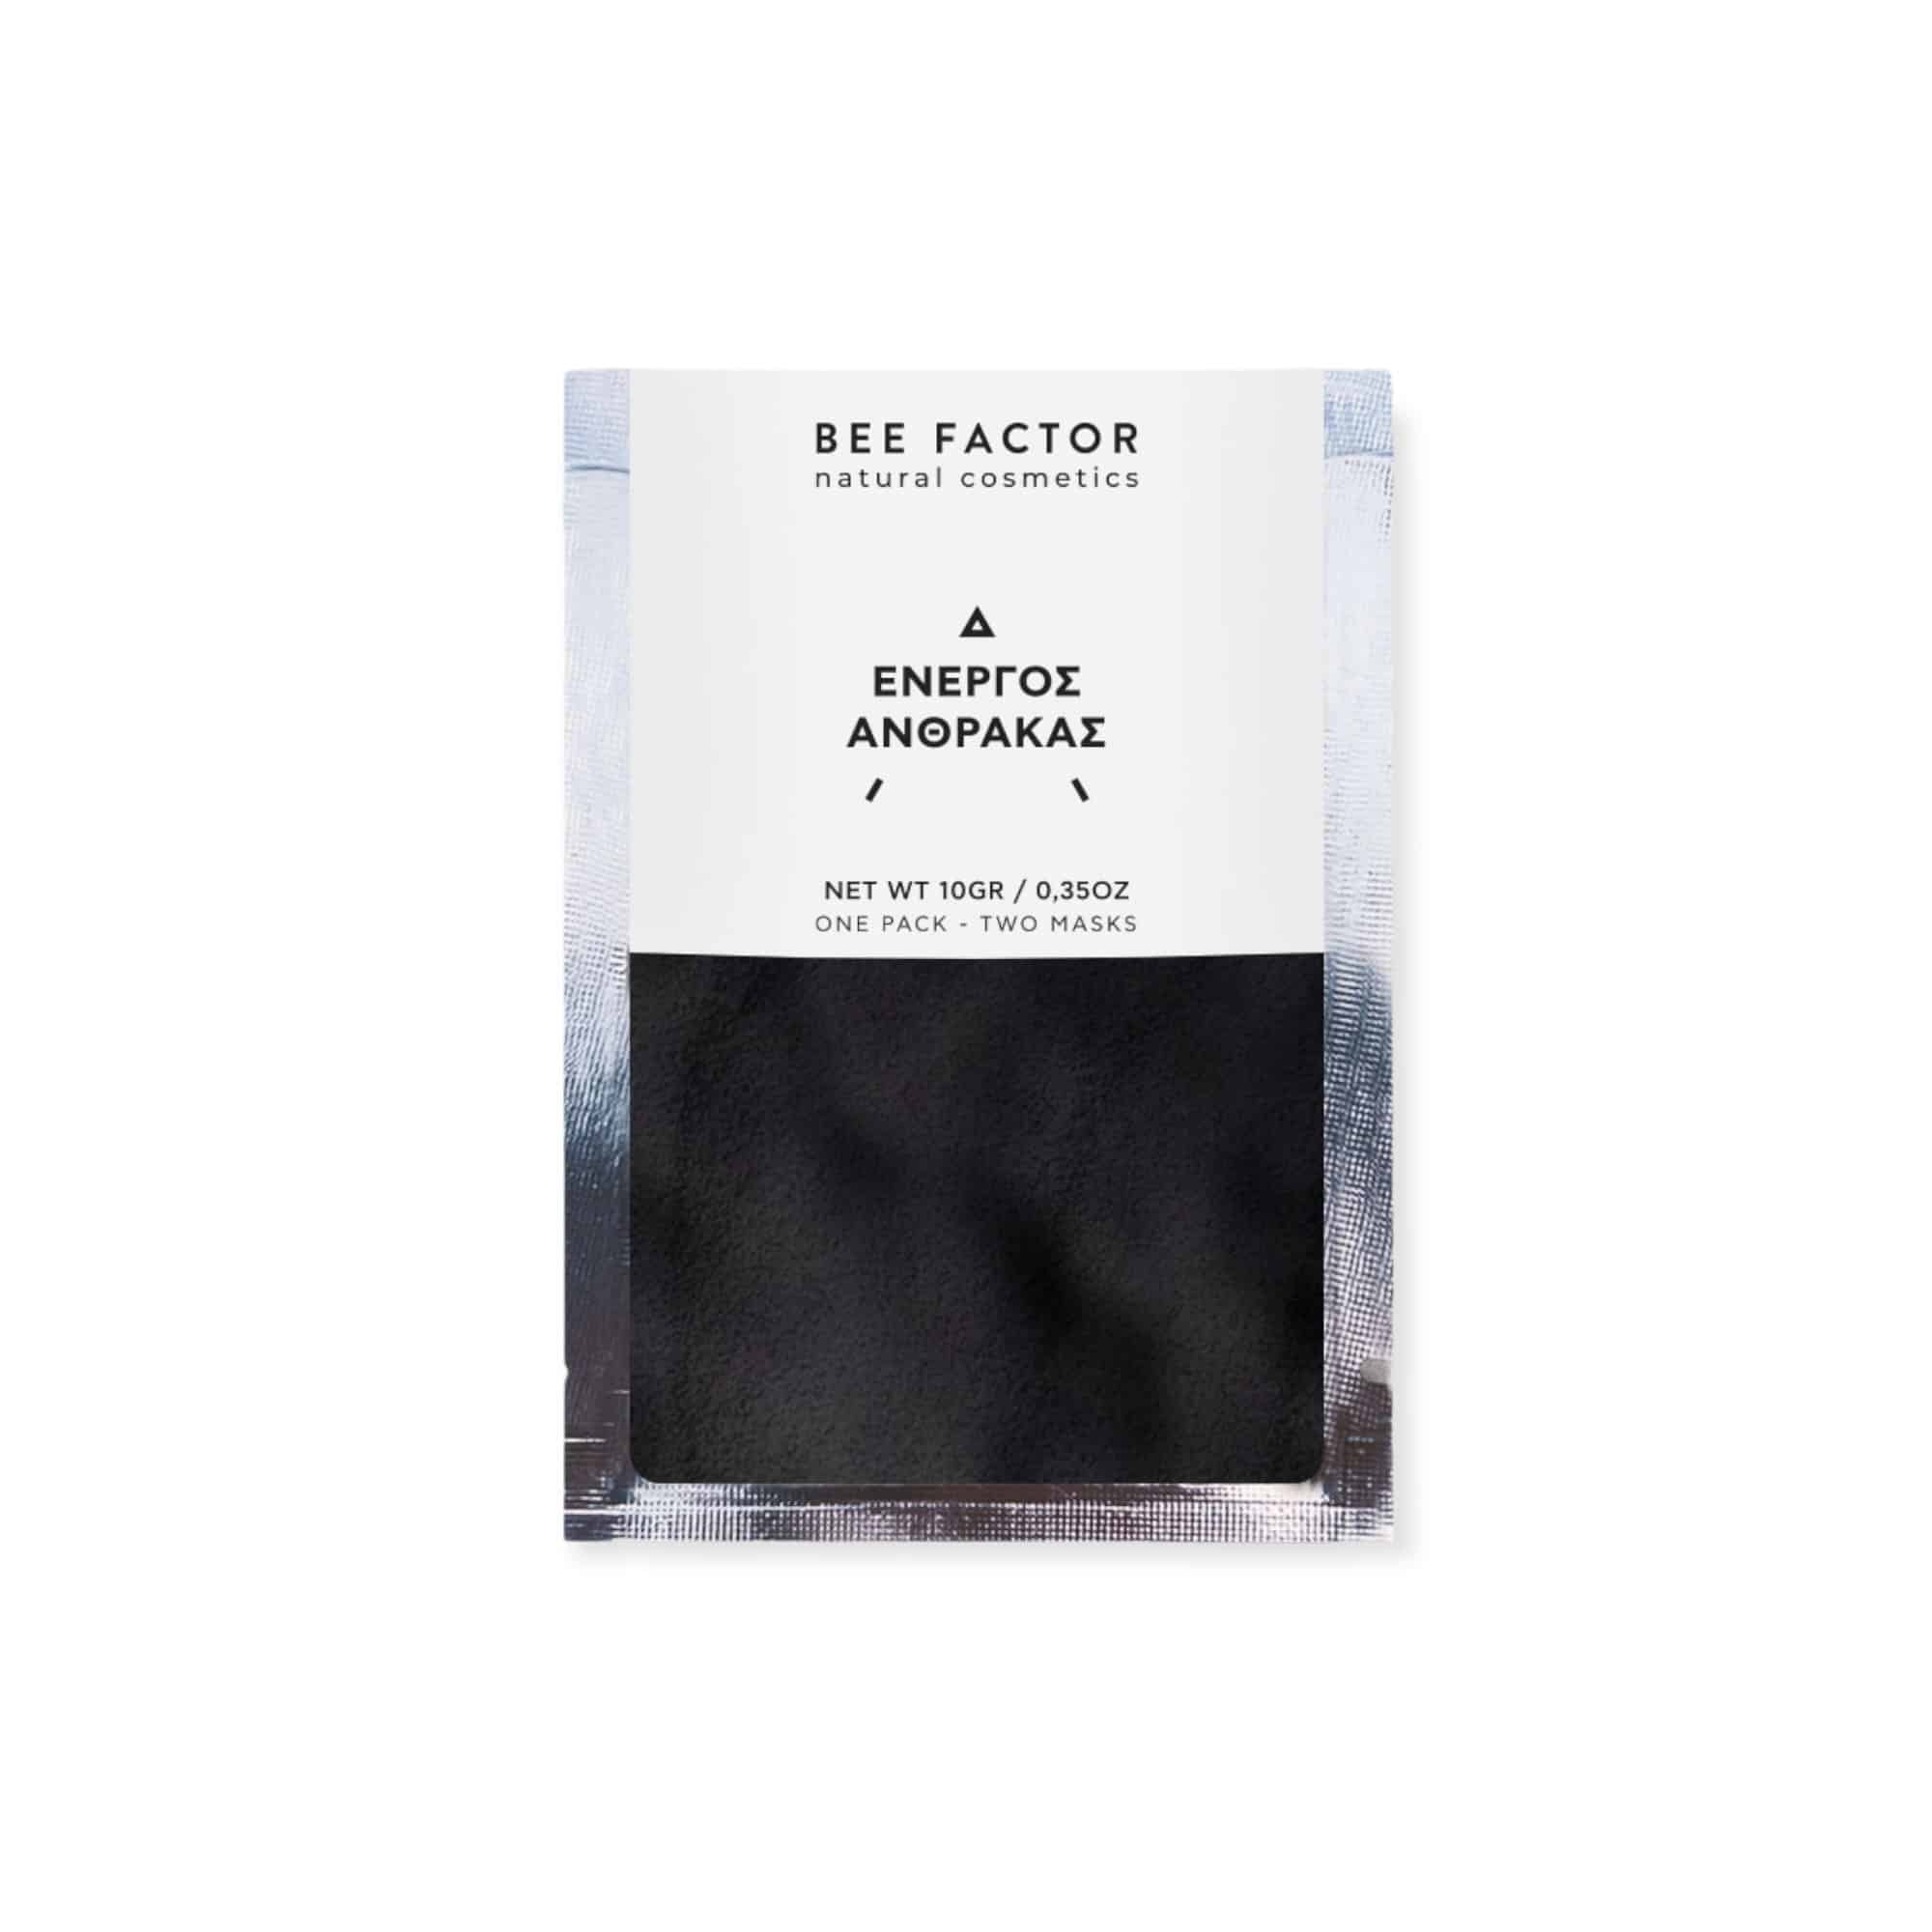 Bee Factor face mask activated carbon 10g